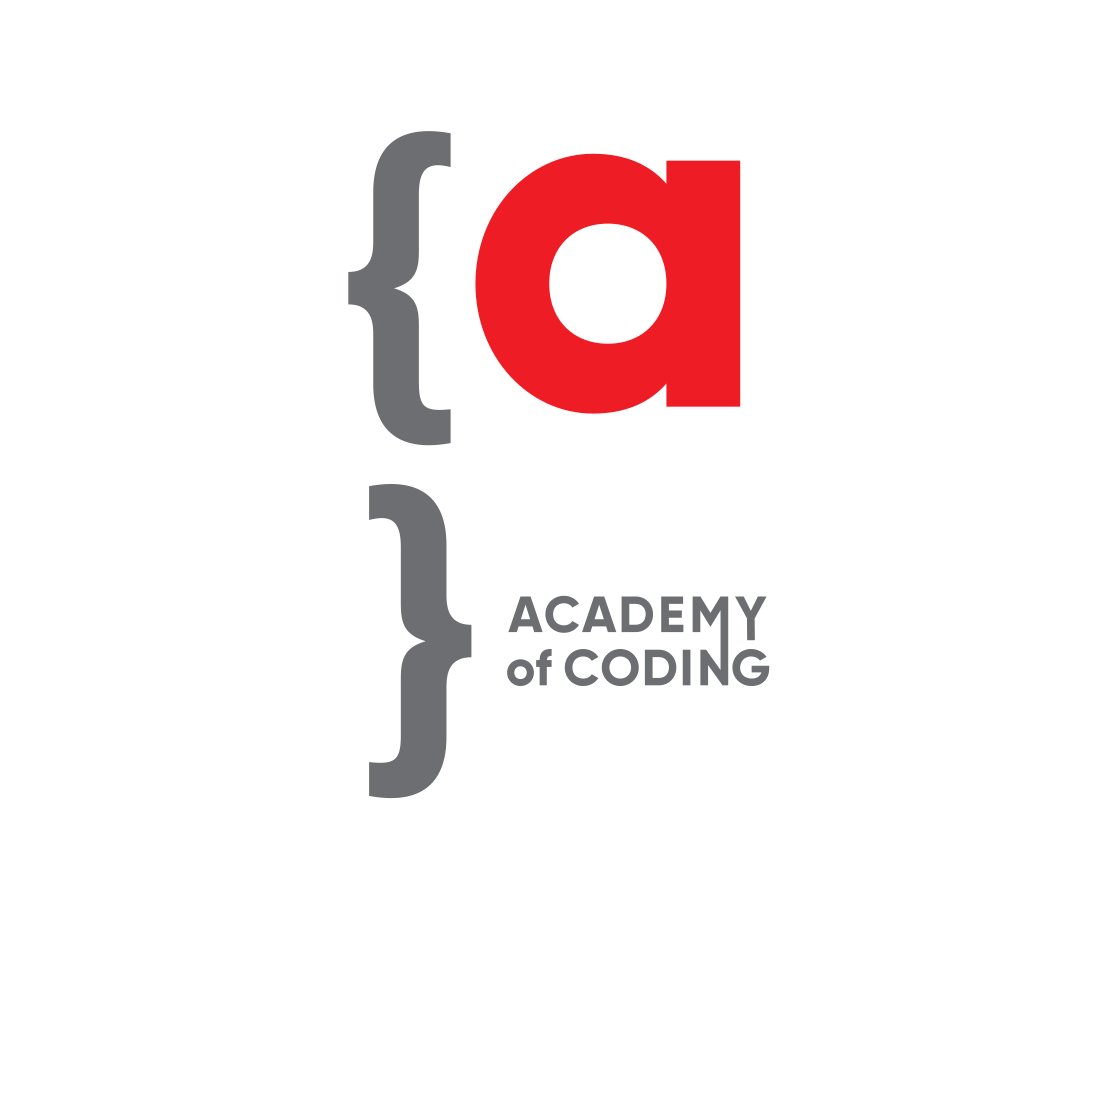 Academy of Coding aims to teach coding in a complete immersive, student oriented and portfolio driven methodology at the heart of the Silicon Valley.